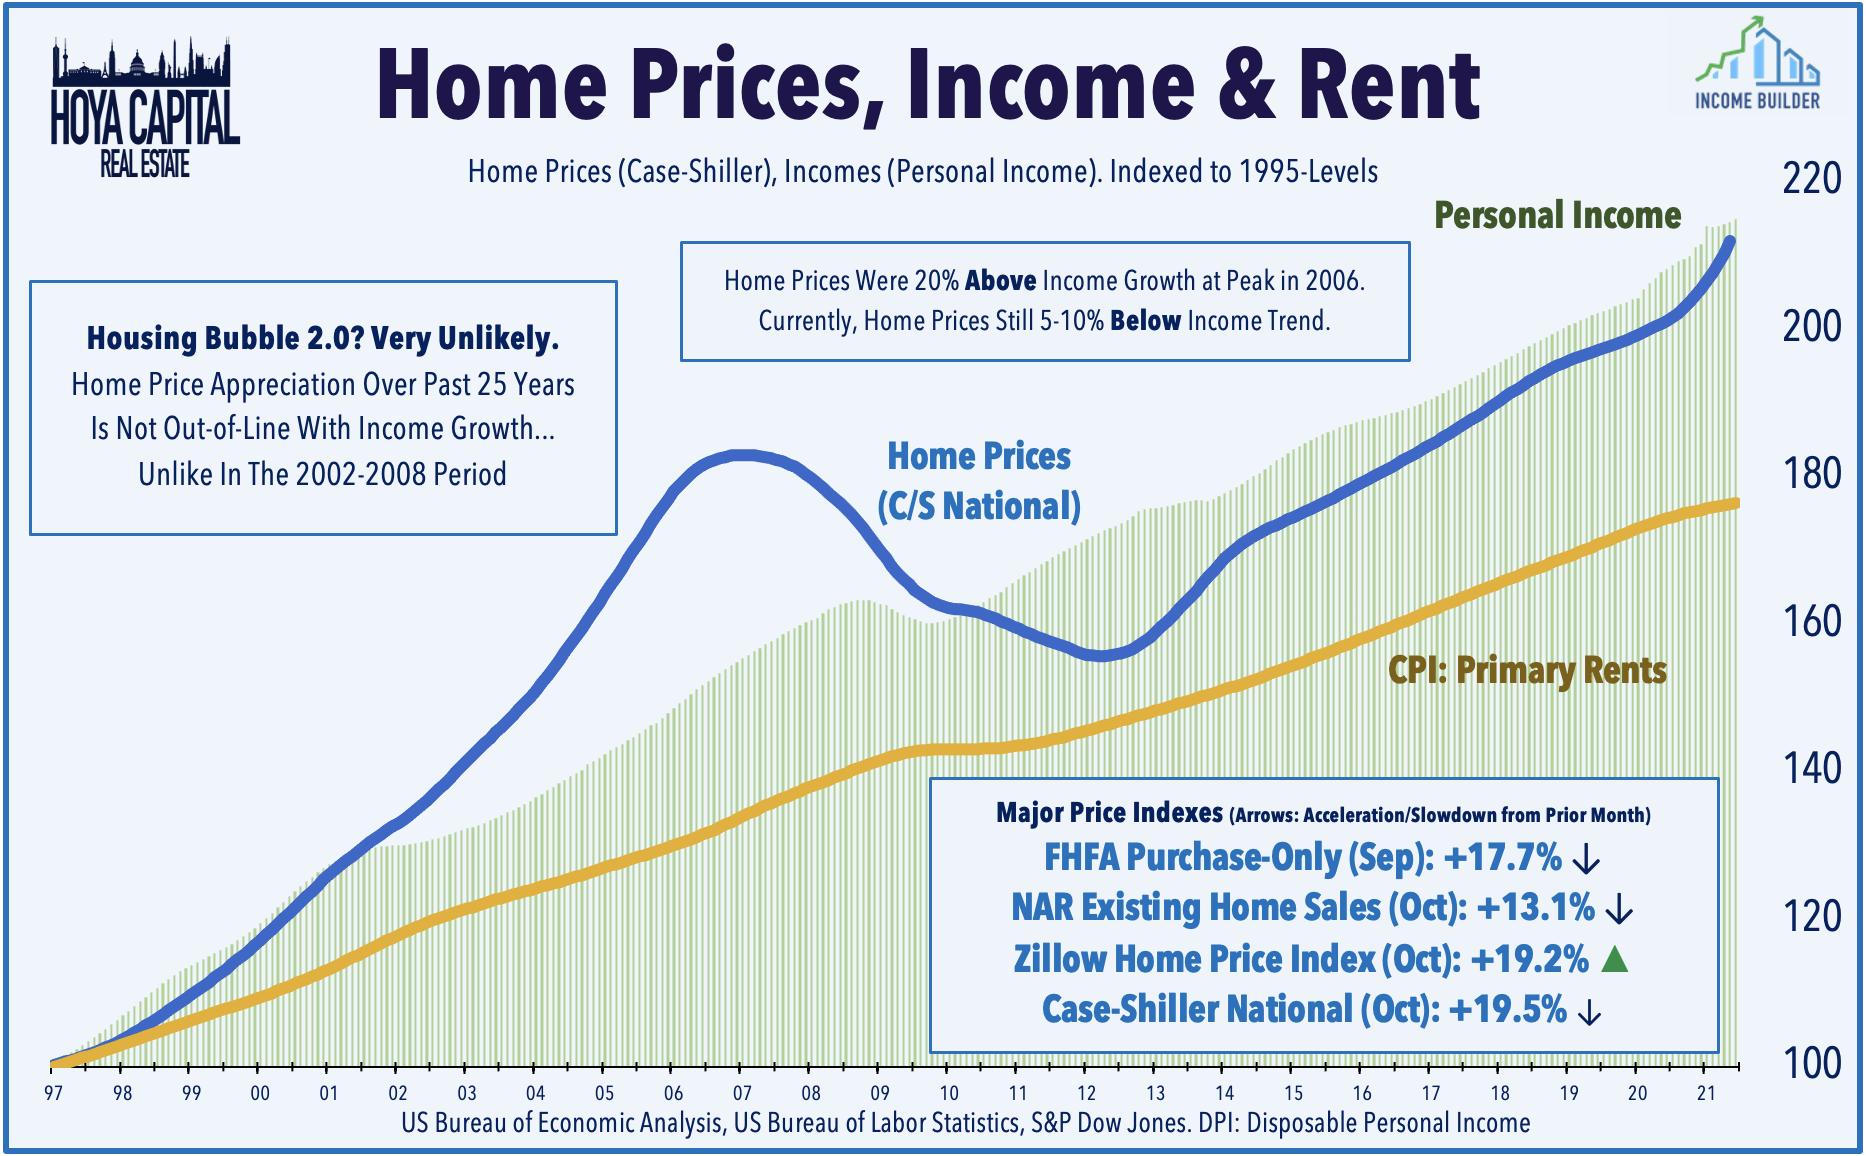 Line chart showing house prices rising at same rate as personal income, but rental rates rising a bit more slowly